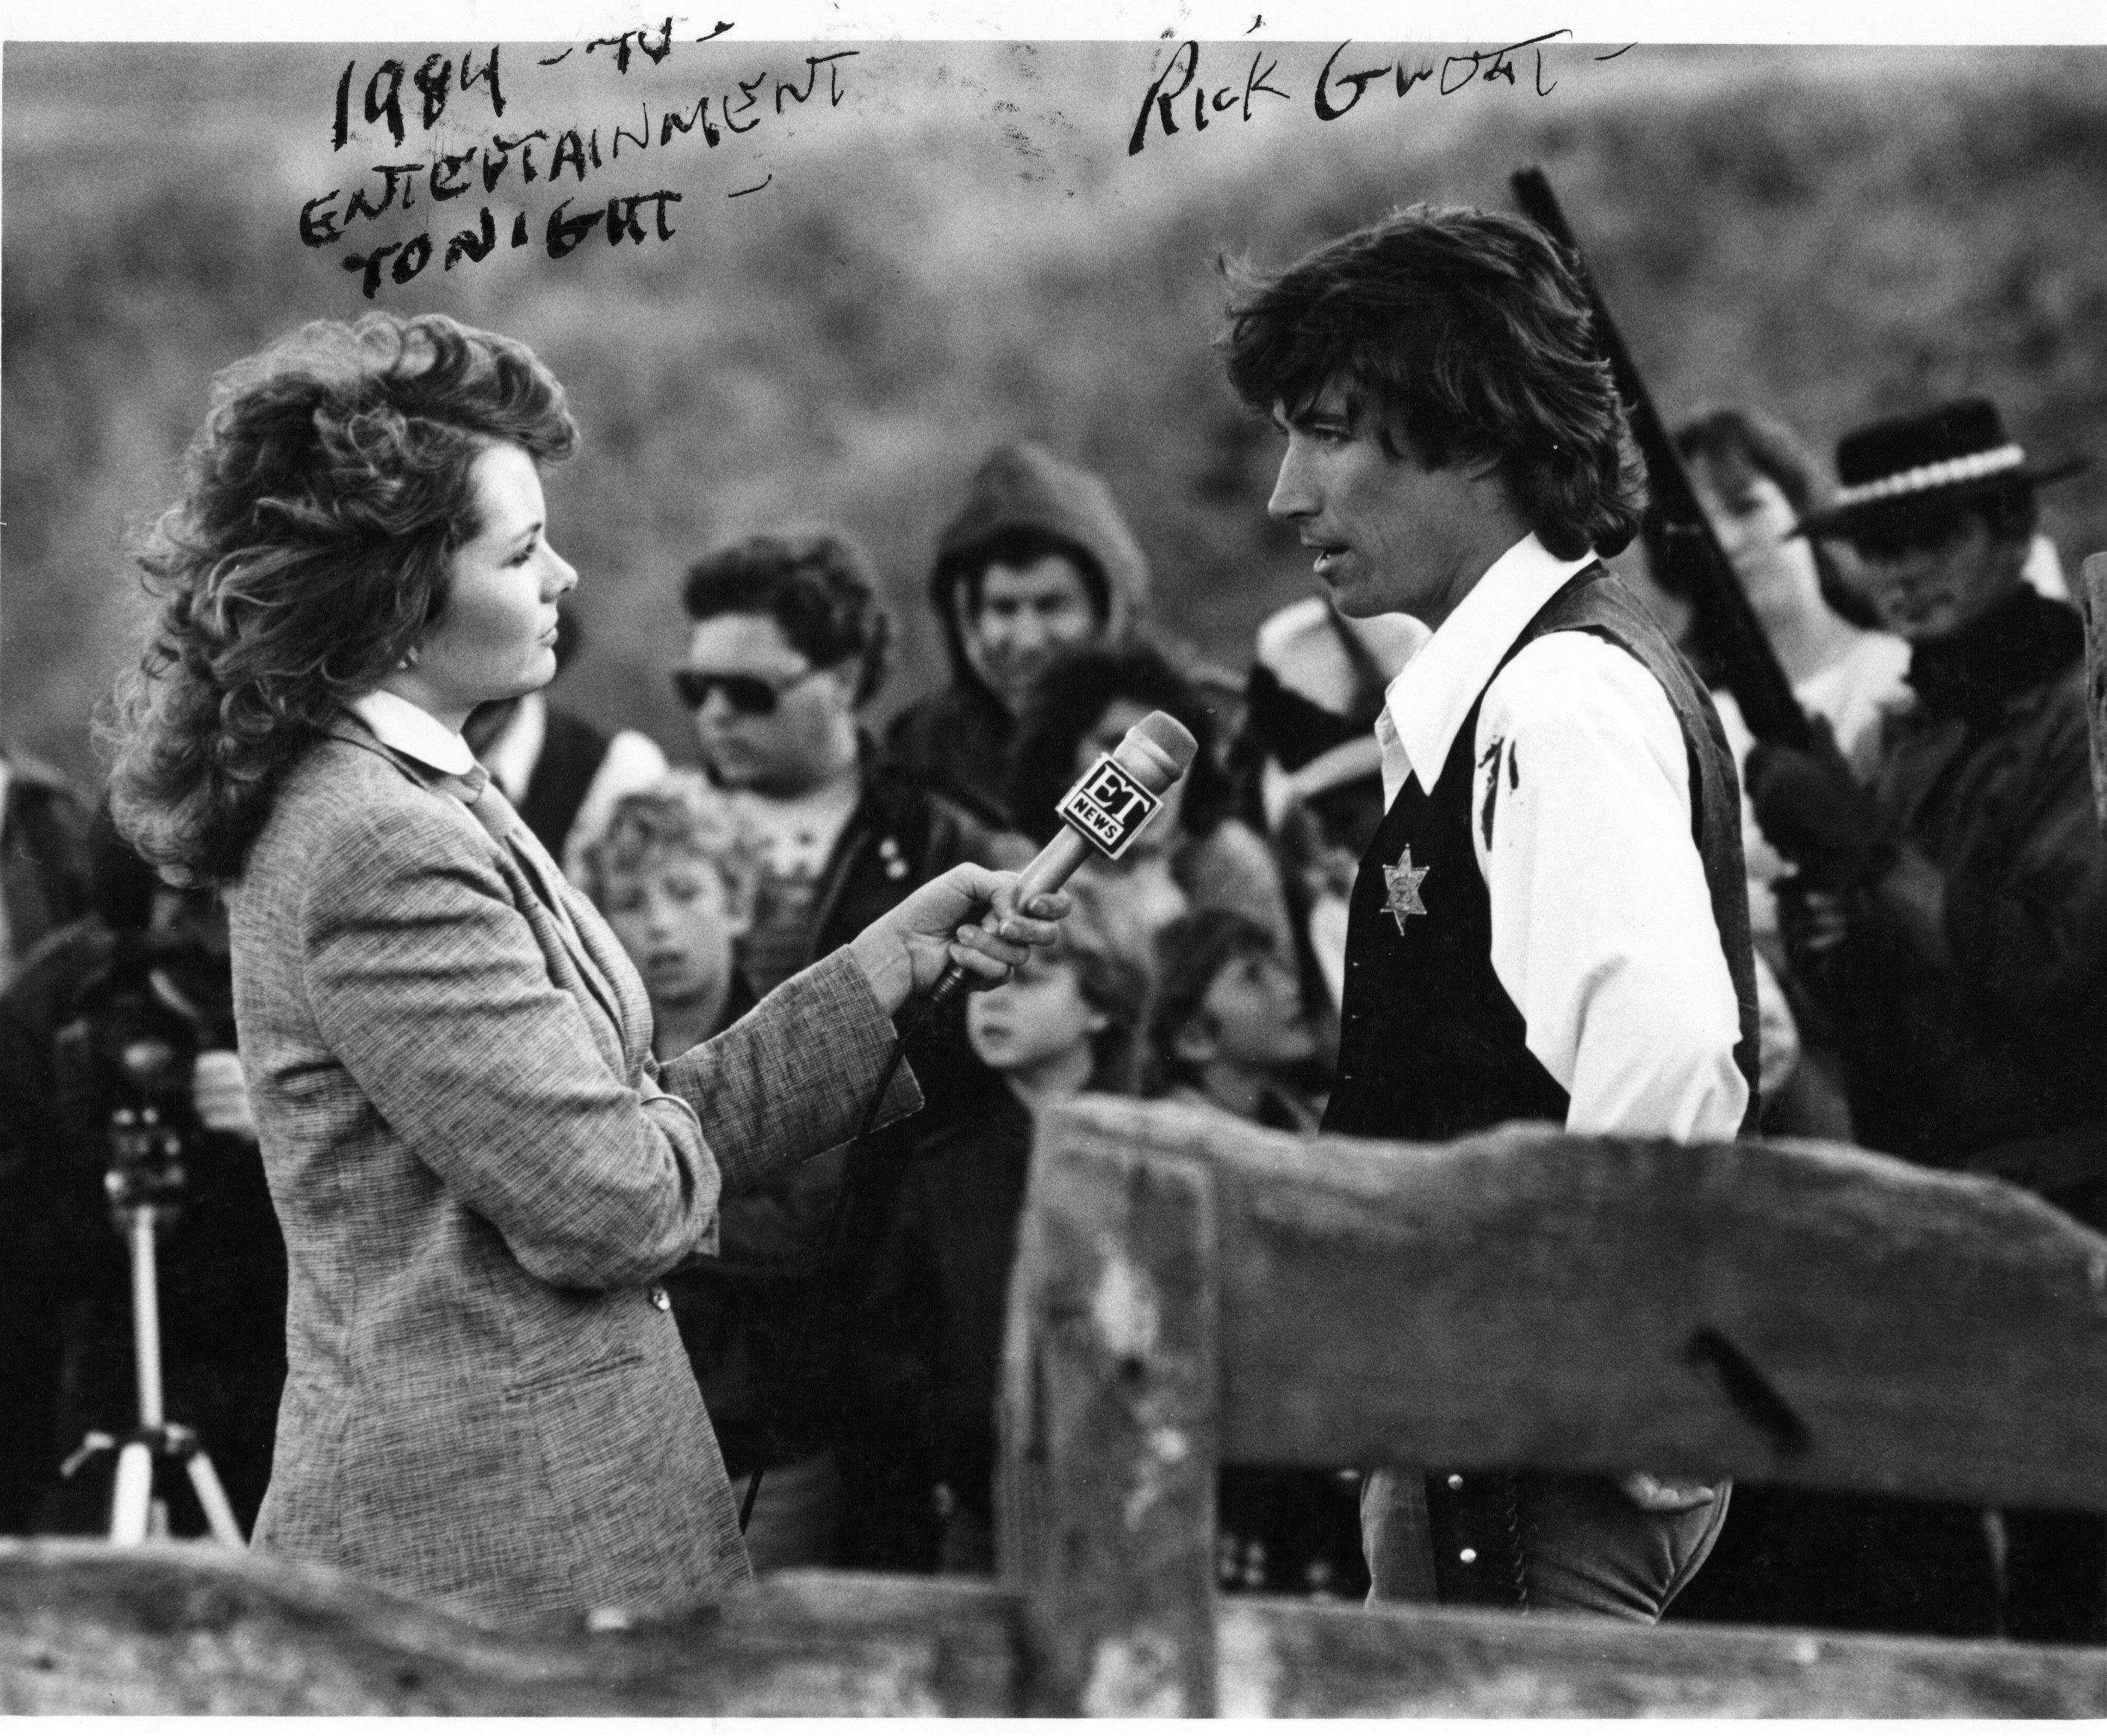 Rick Groat , Dixie Wattley TV show Entertainment Tonight 1984 for The Shooting film. See more at:http://www.facebook.com/groatmovie